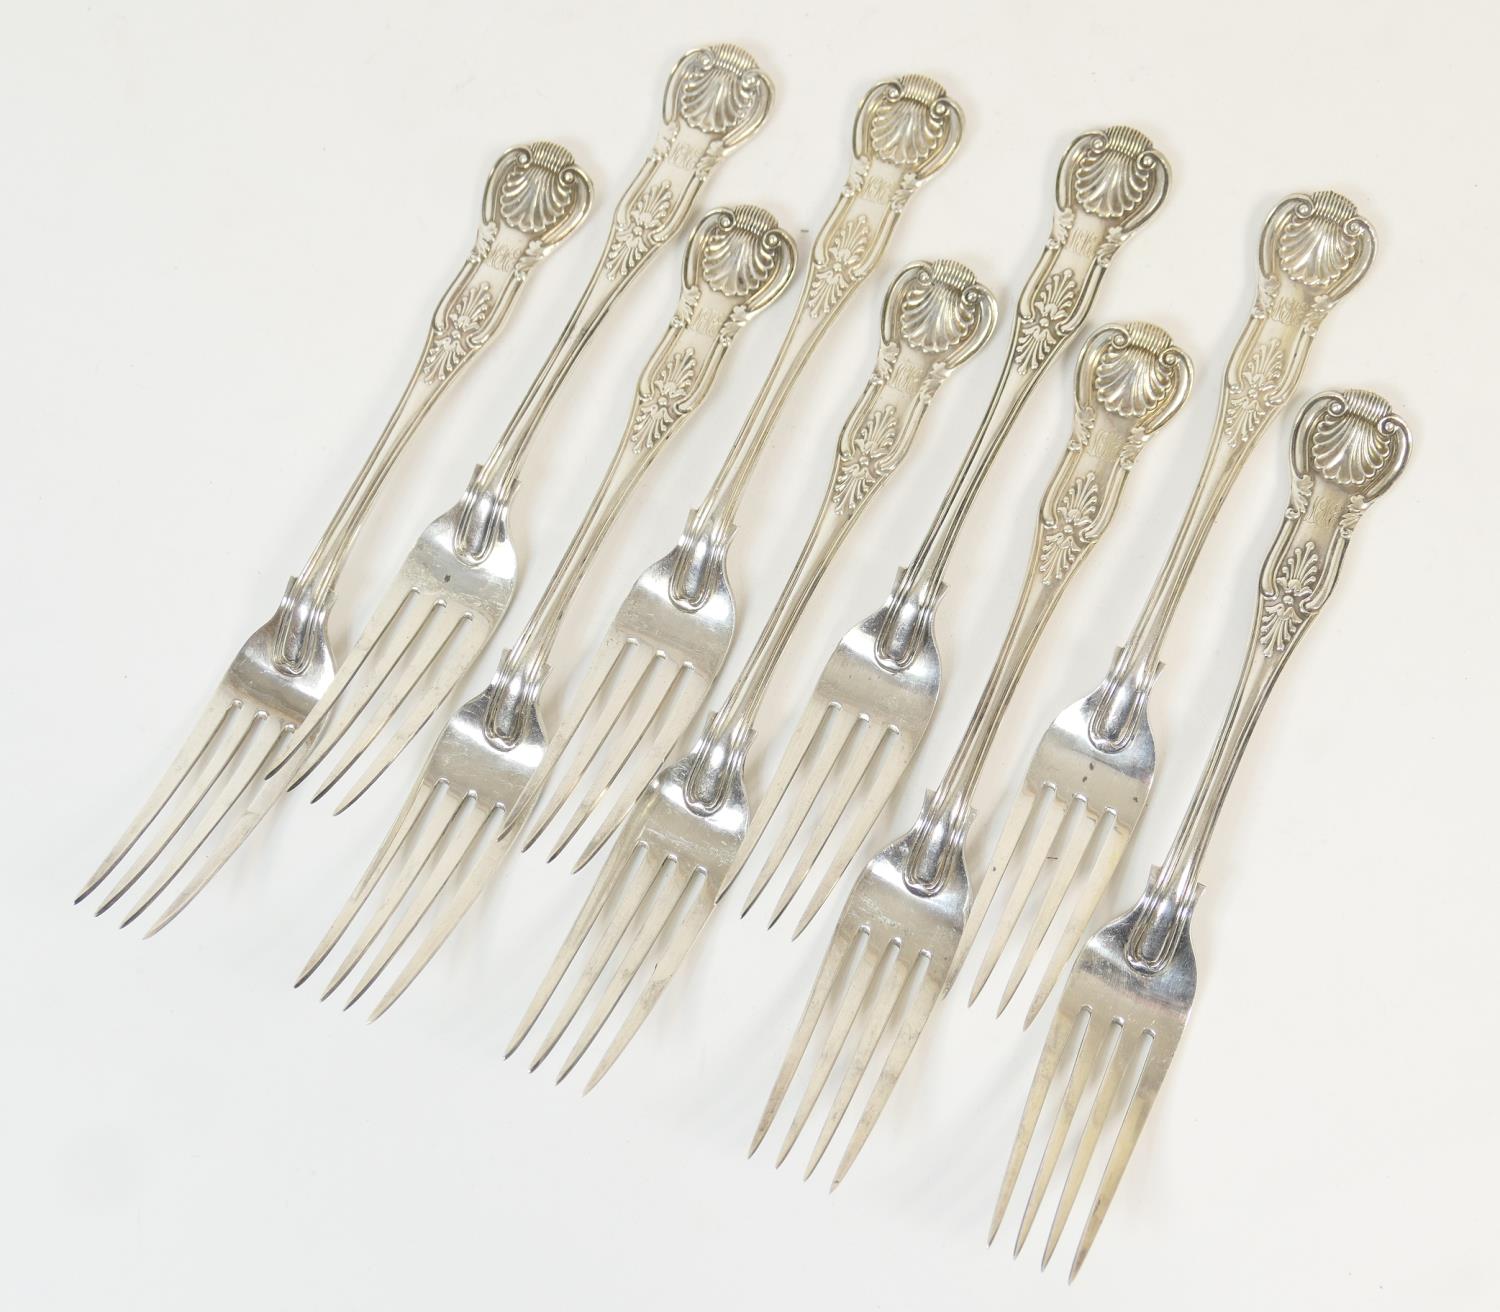 Nine Victorian silver Kings pattern table forks, by George Adams, London 1872, engraved with a